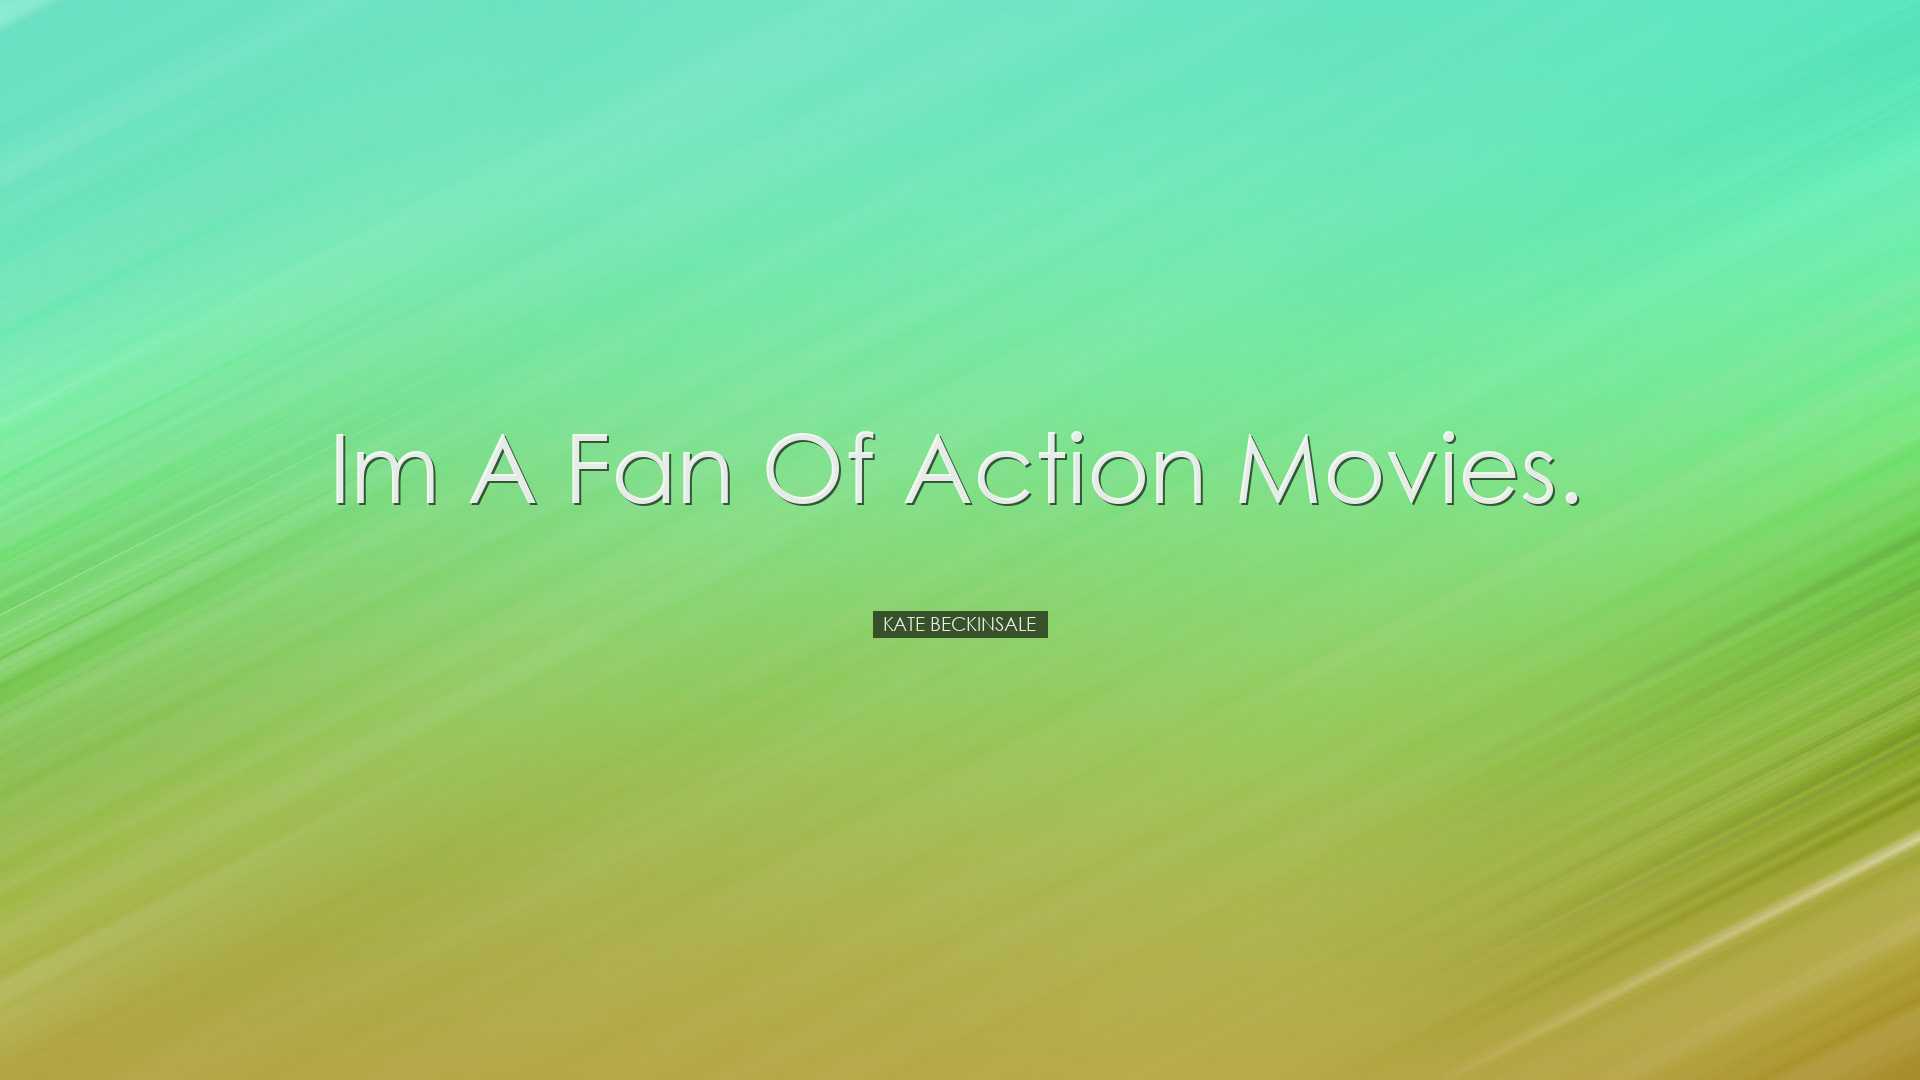 Im a fan of action movies. - Kate Beckinsale